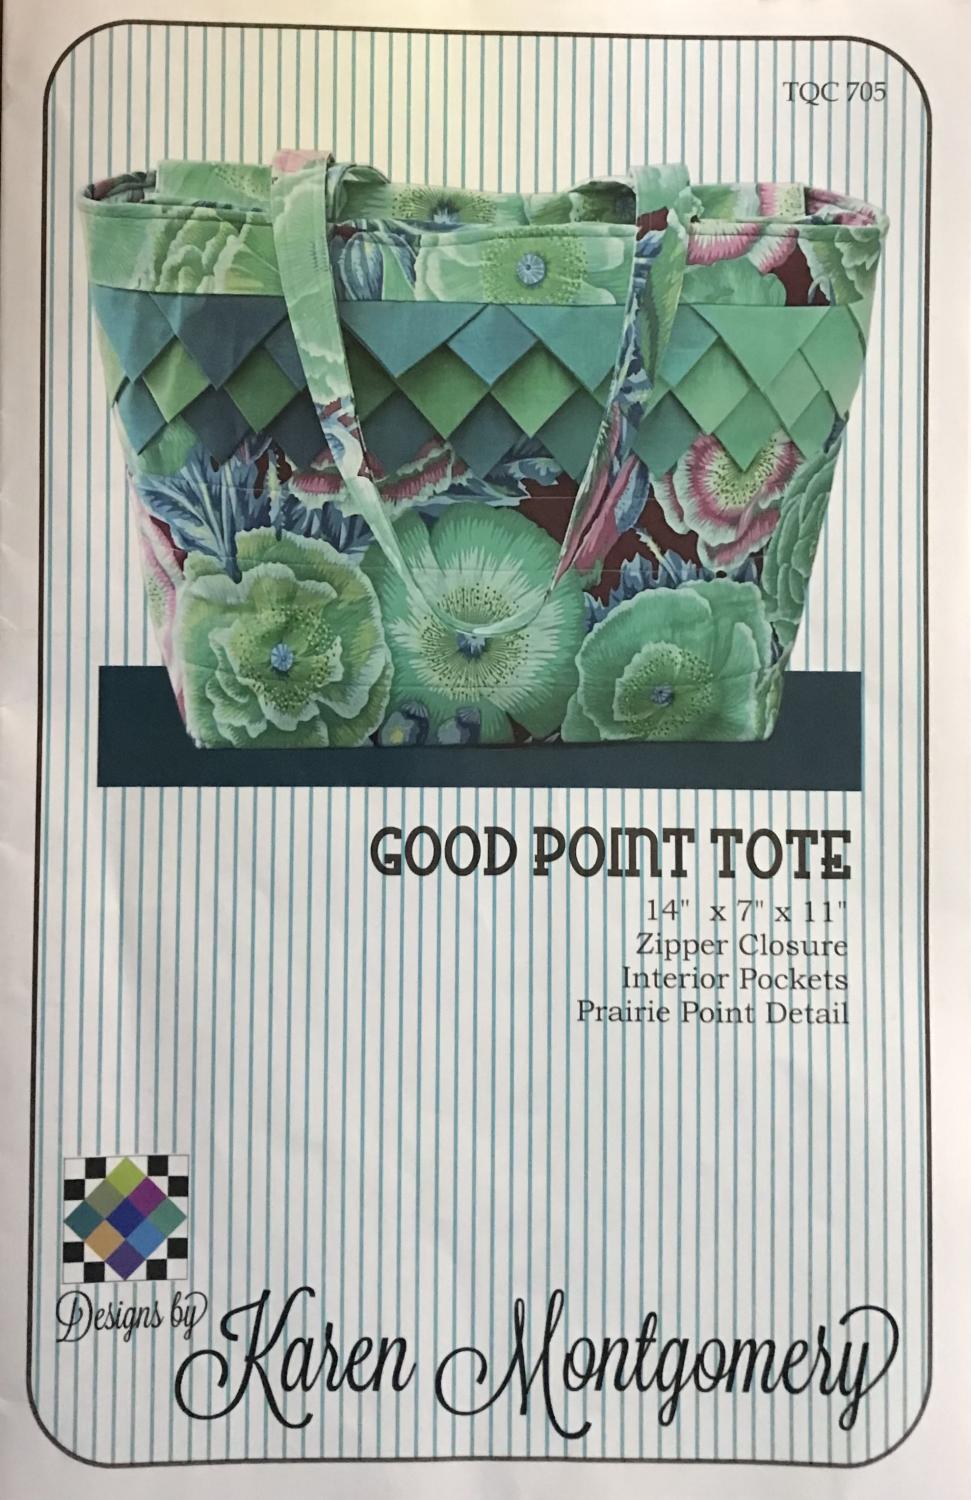 Good Point Tote Book Club - Pattern #8